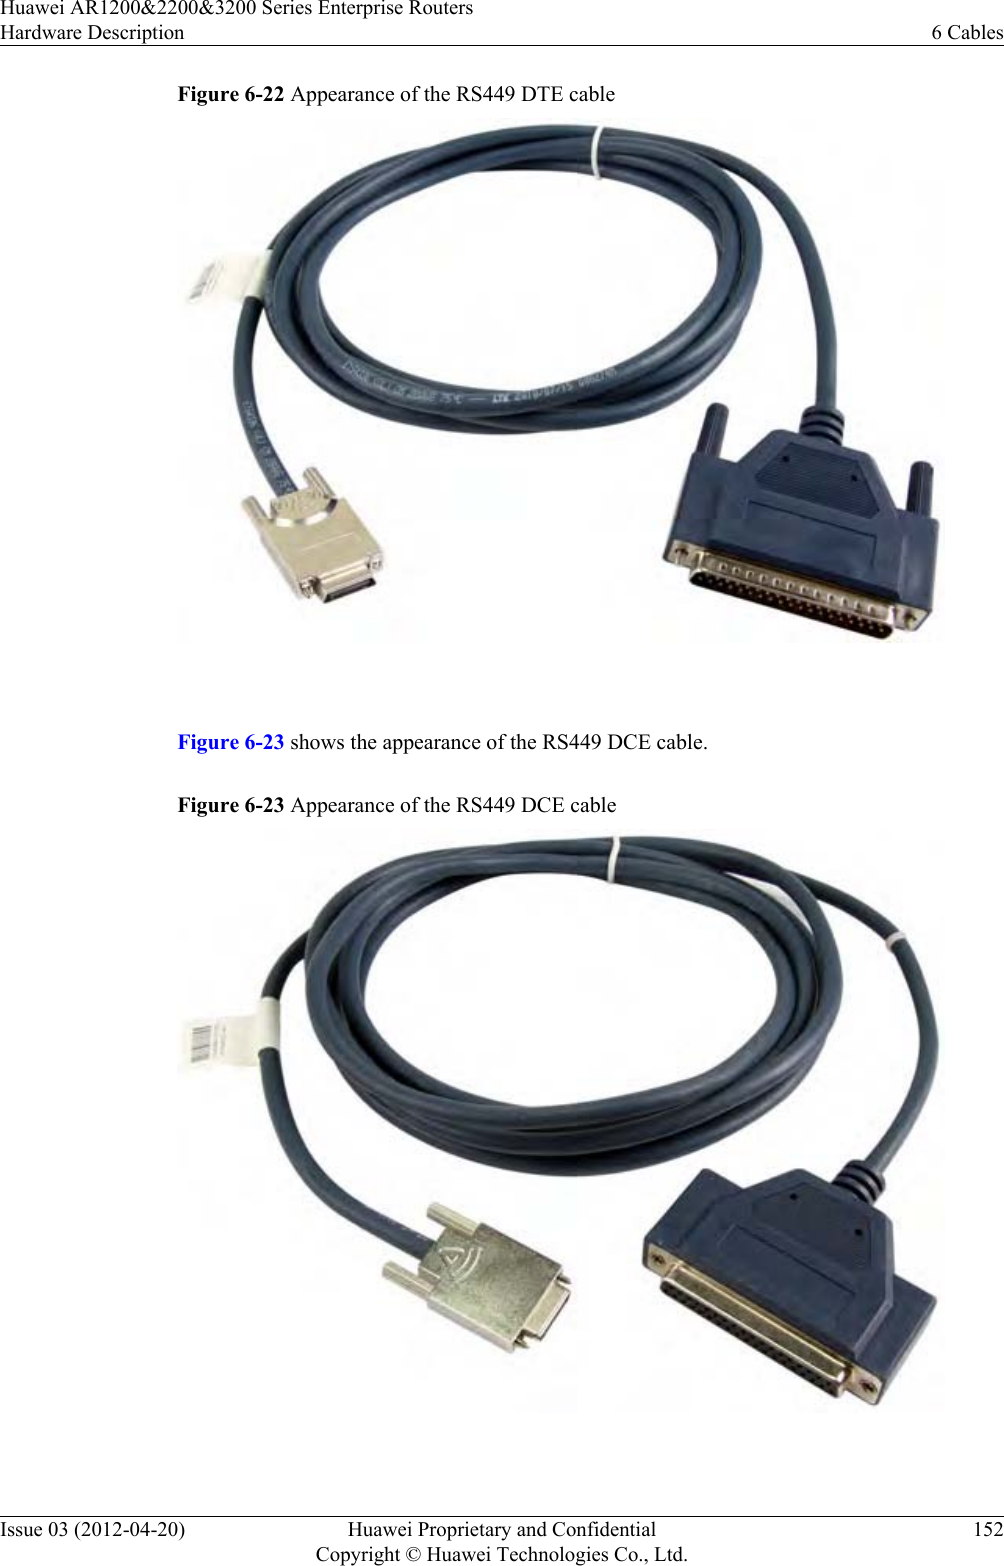 Figure 6-22 Appearance of the RS449 DTE cable Figure 6-23 shows the appearance of the RS449 DCE cable.Figure 6-23 Appearance of the RS449 DCE cable Huawei AR1200&amp;2200&amp;3200 Series Enterprise RoutersHardware Description 6 CablesIssue 03 (2012-04-20) Huawei Proprietary and ConfidentialCopyright © Huawei Technologies Co., Ltd.152